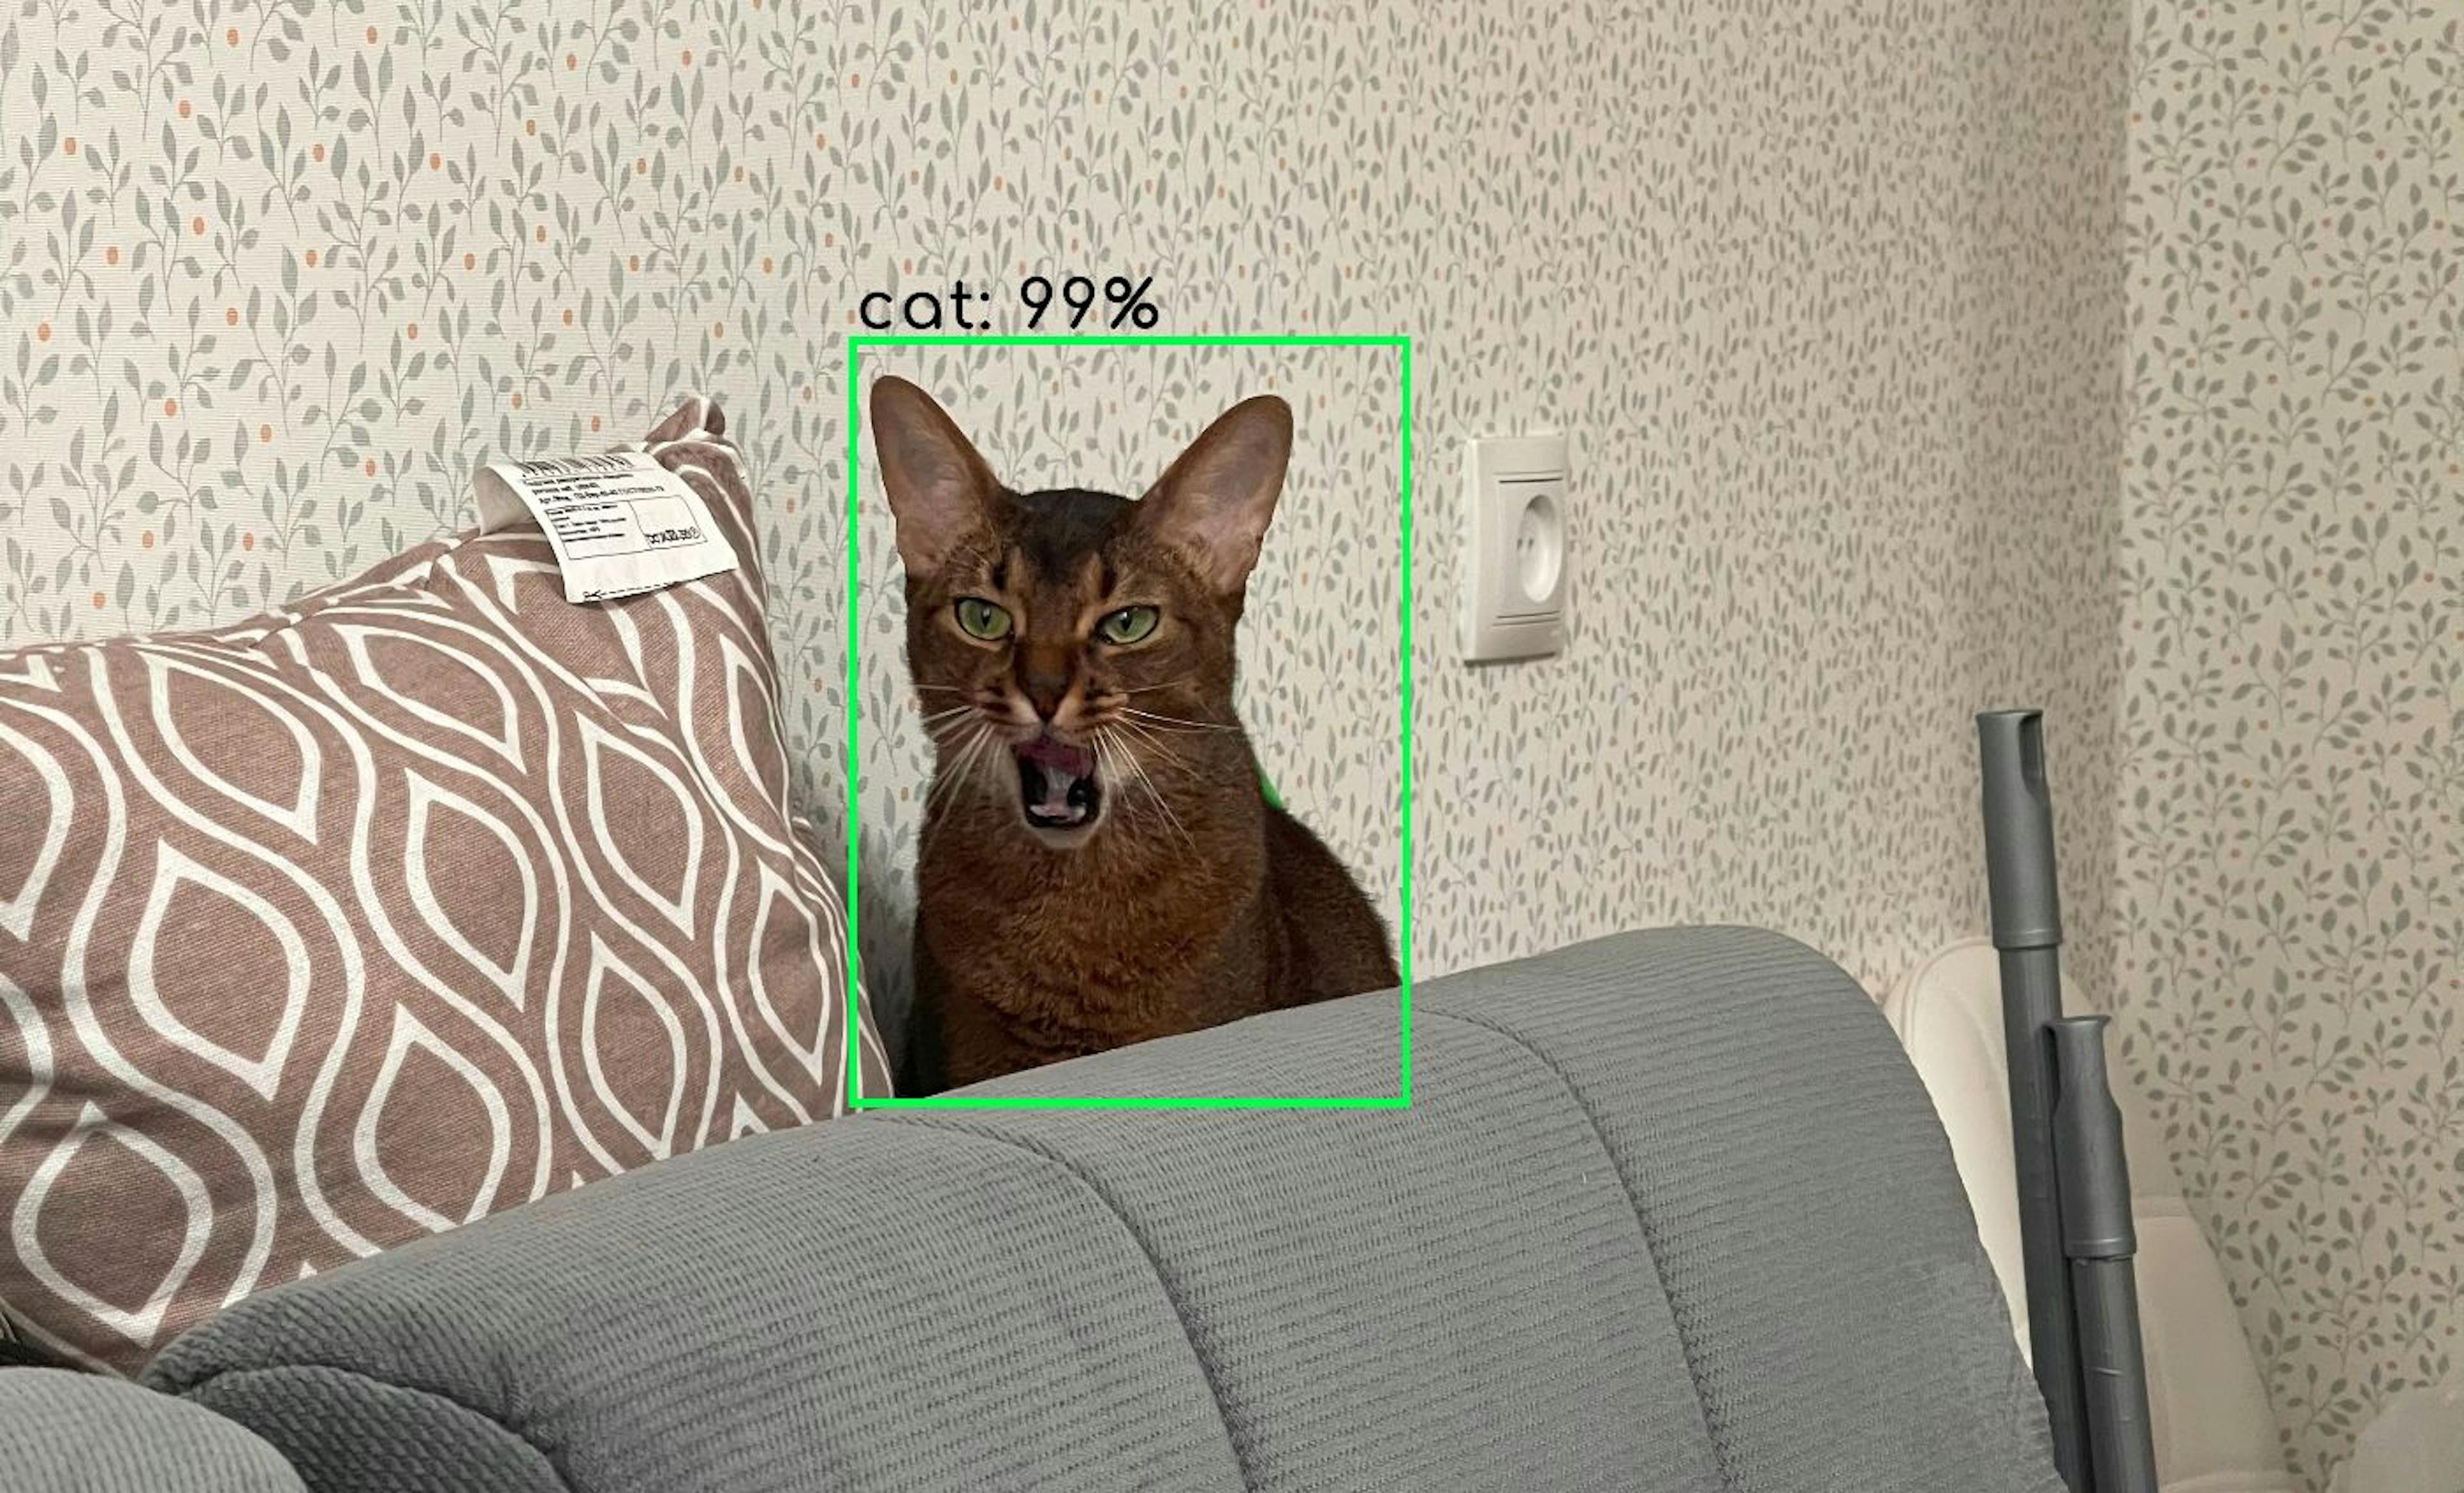 featured image - Object Detection Frameworks That Will Dominate 2023 and Beyond